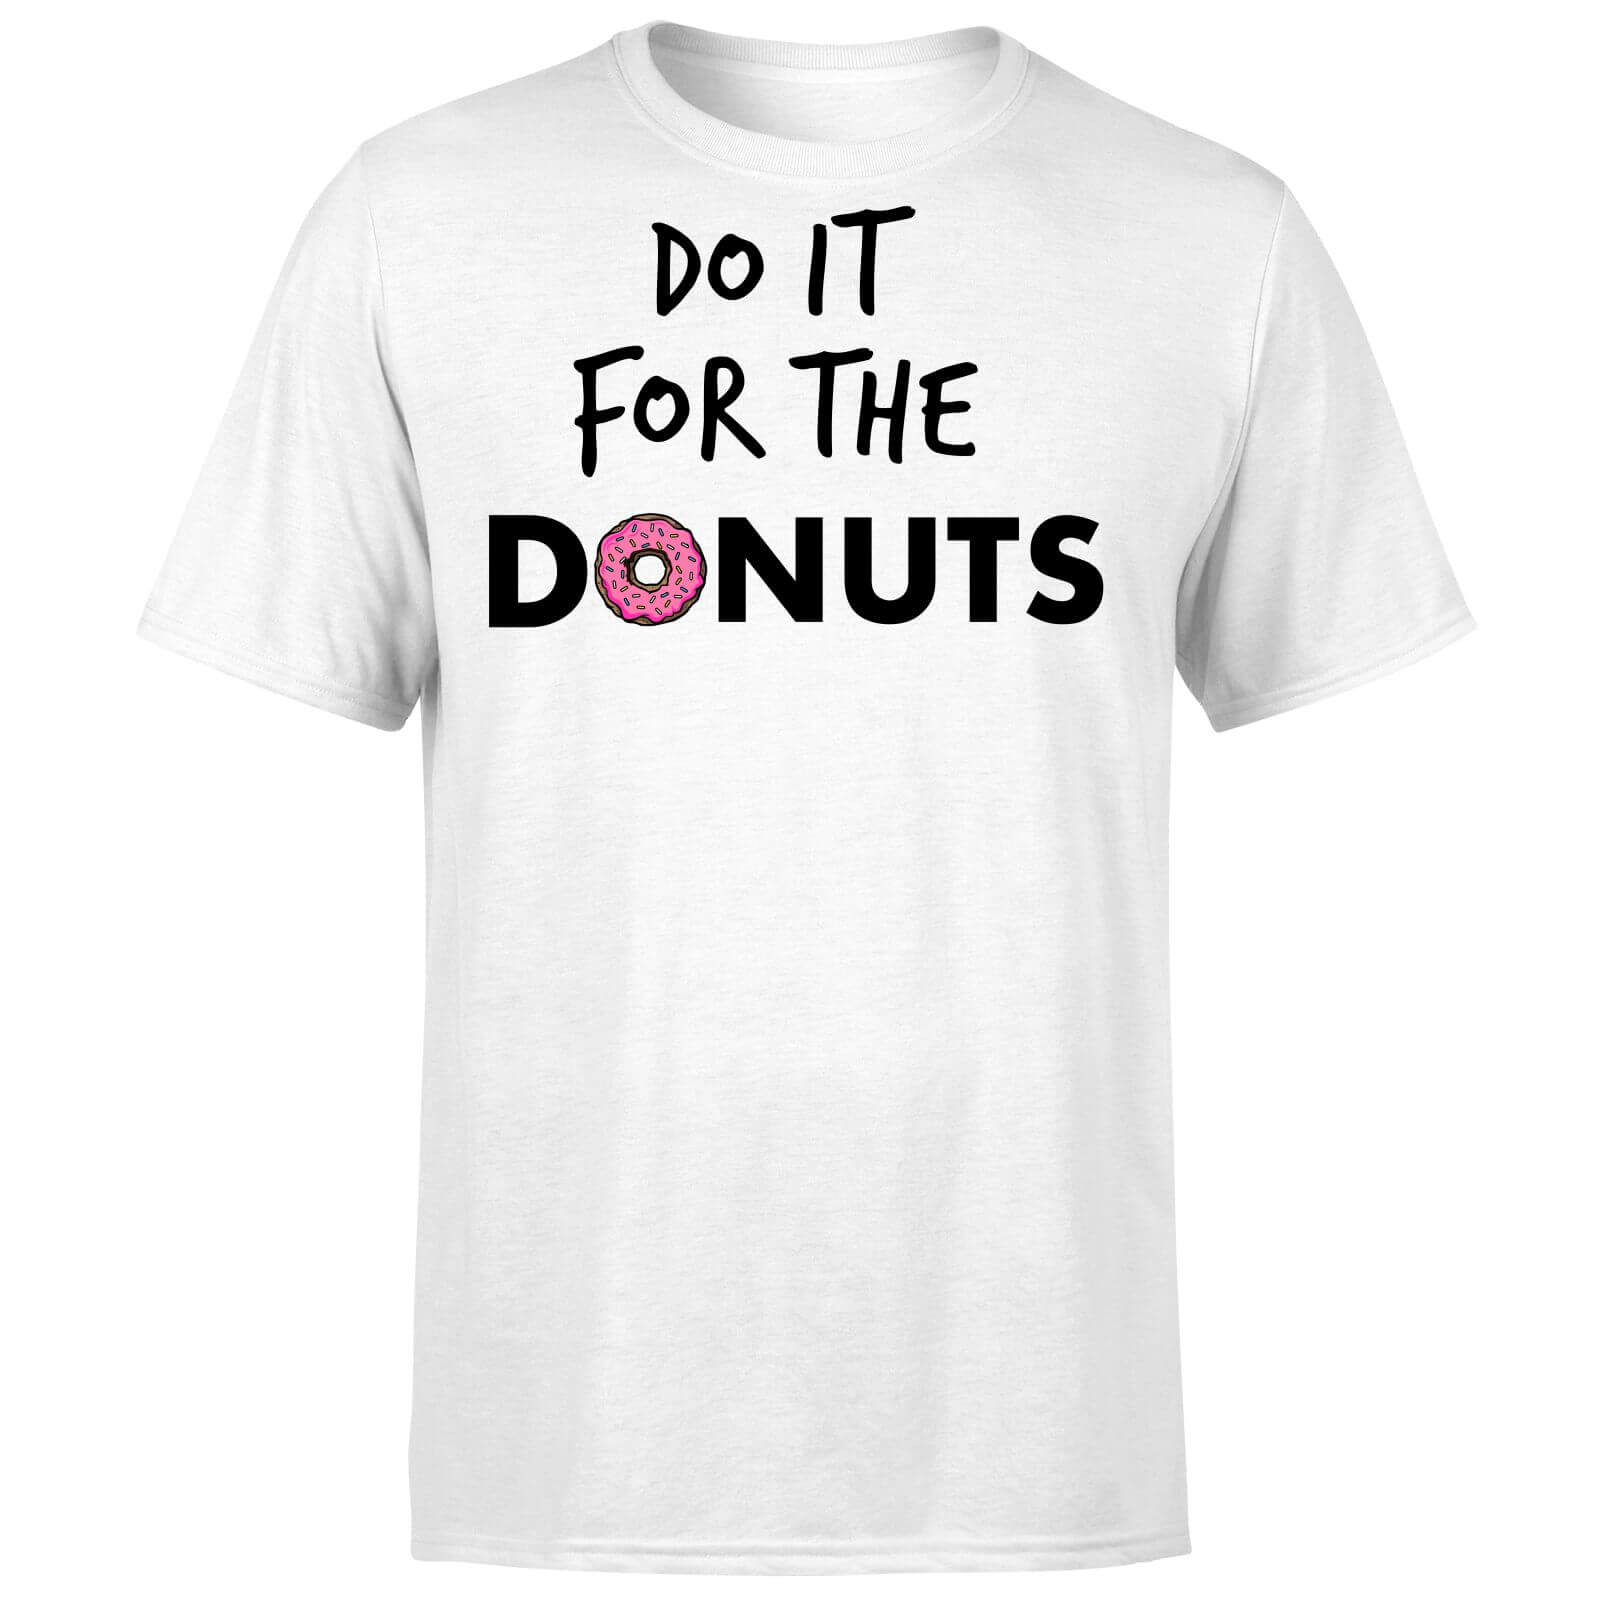 Do it for Donuts T-Shirt - White - S - White